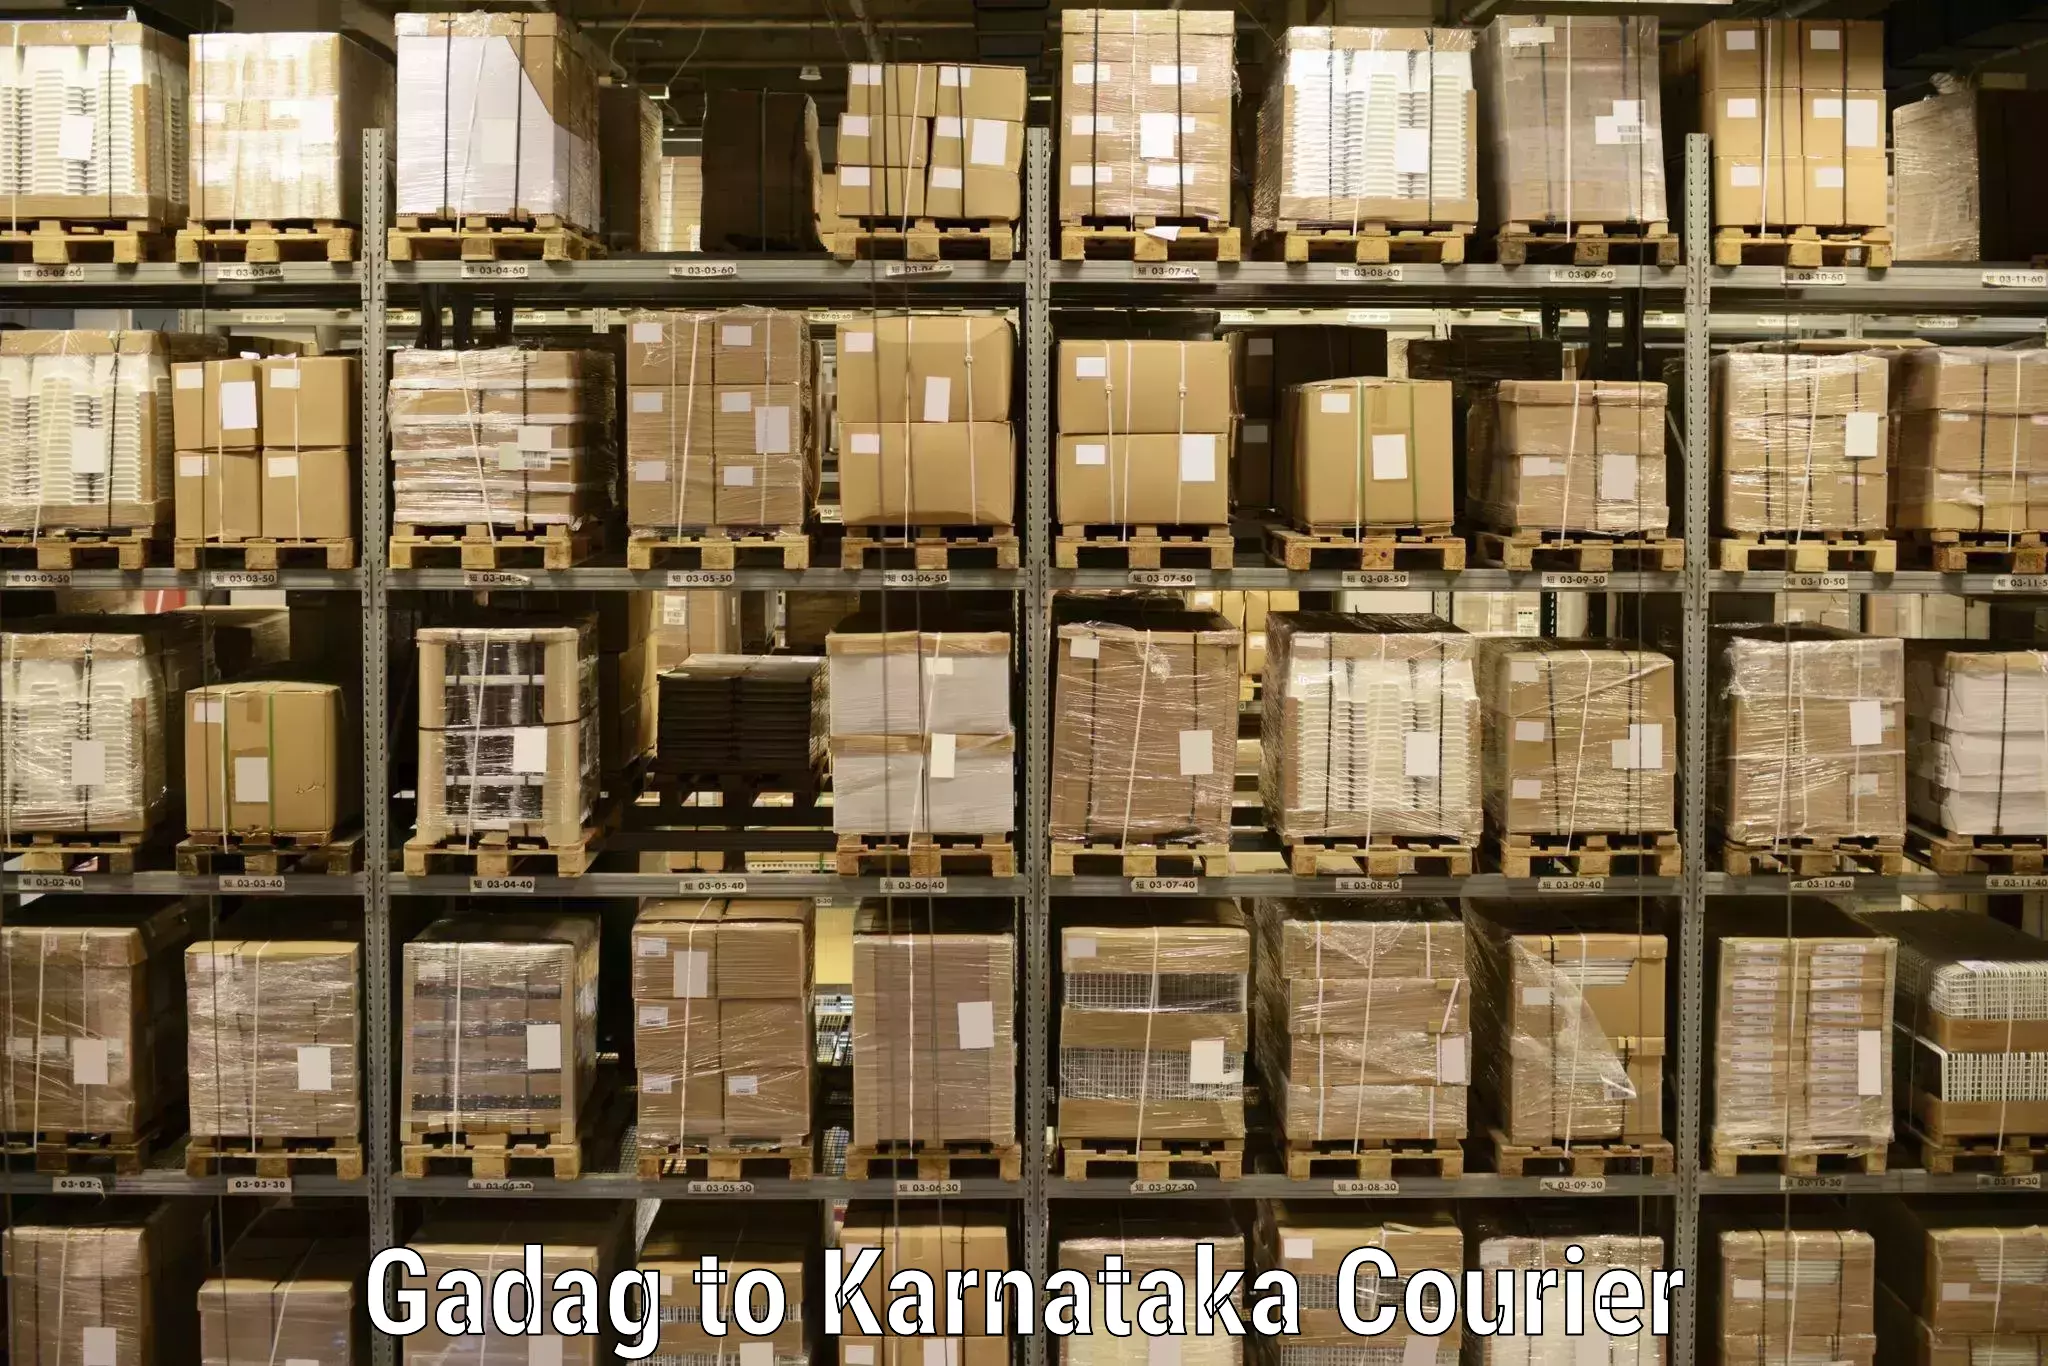 Express delivery capabilities Gadag to Madikeri